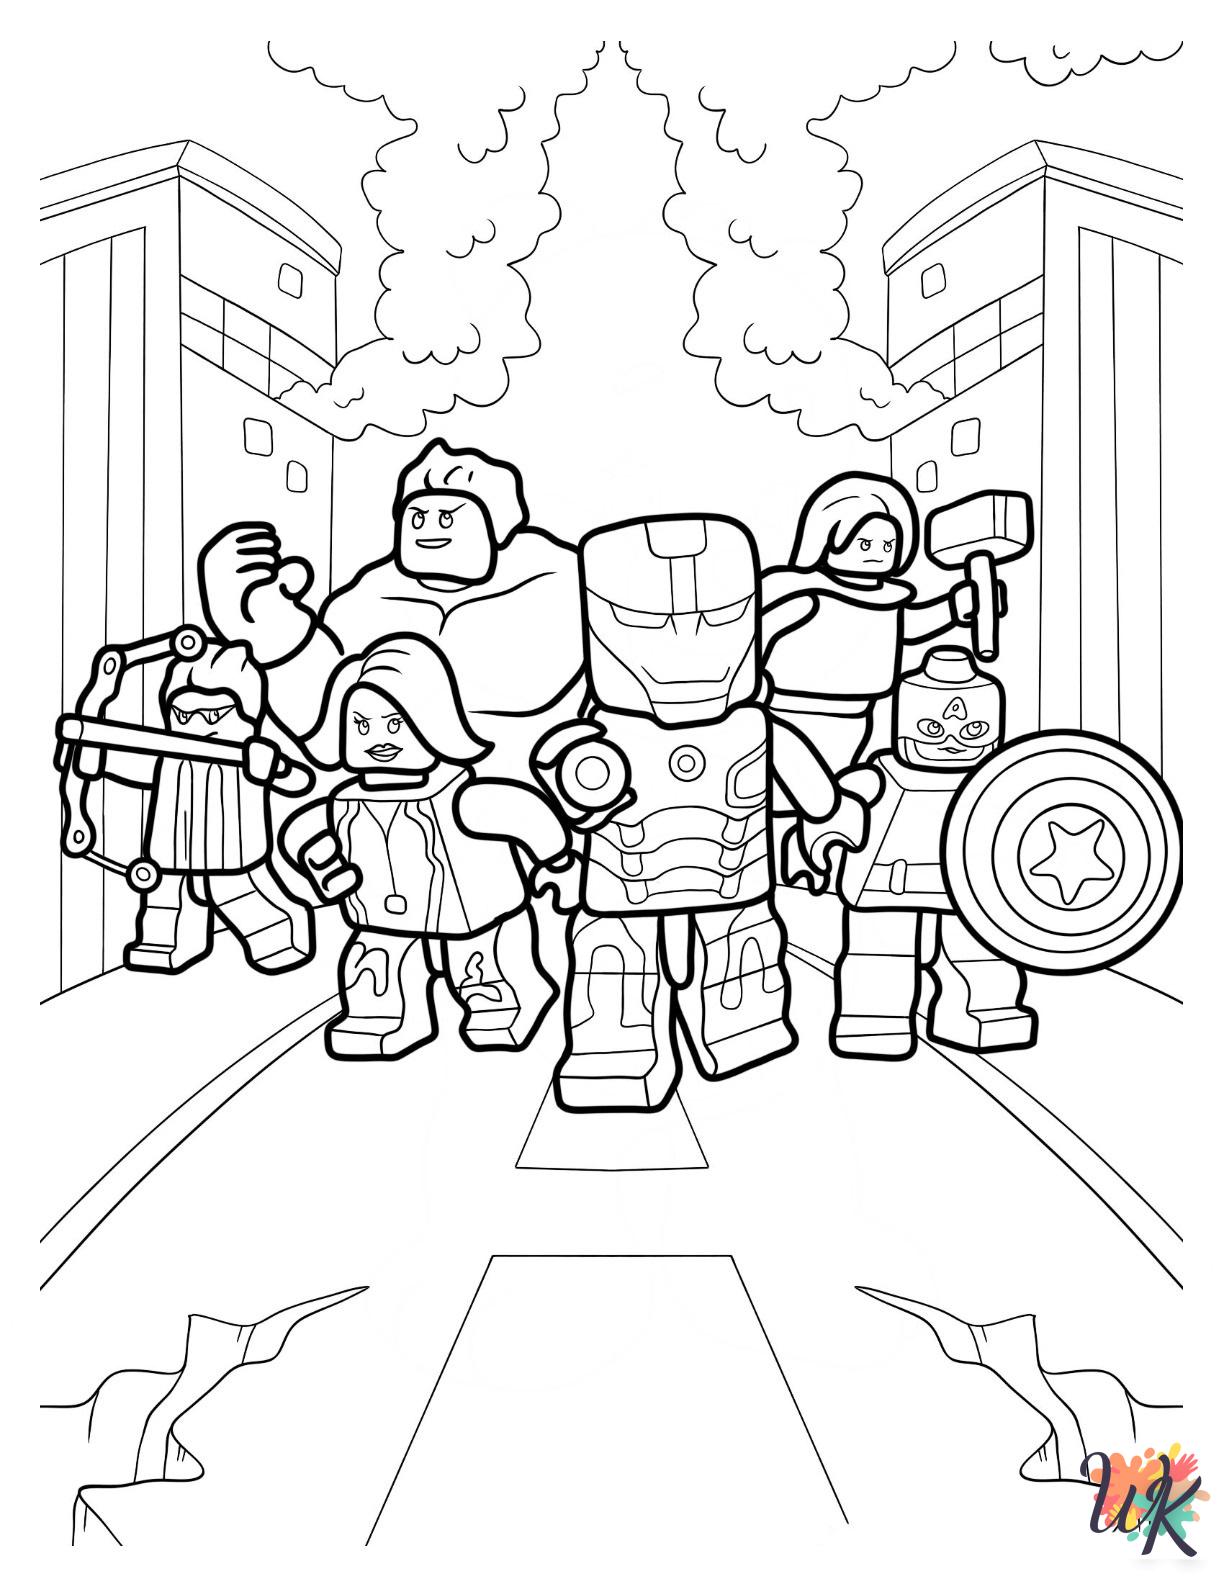 printable Lego Avengers coloring pages for adults